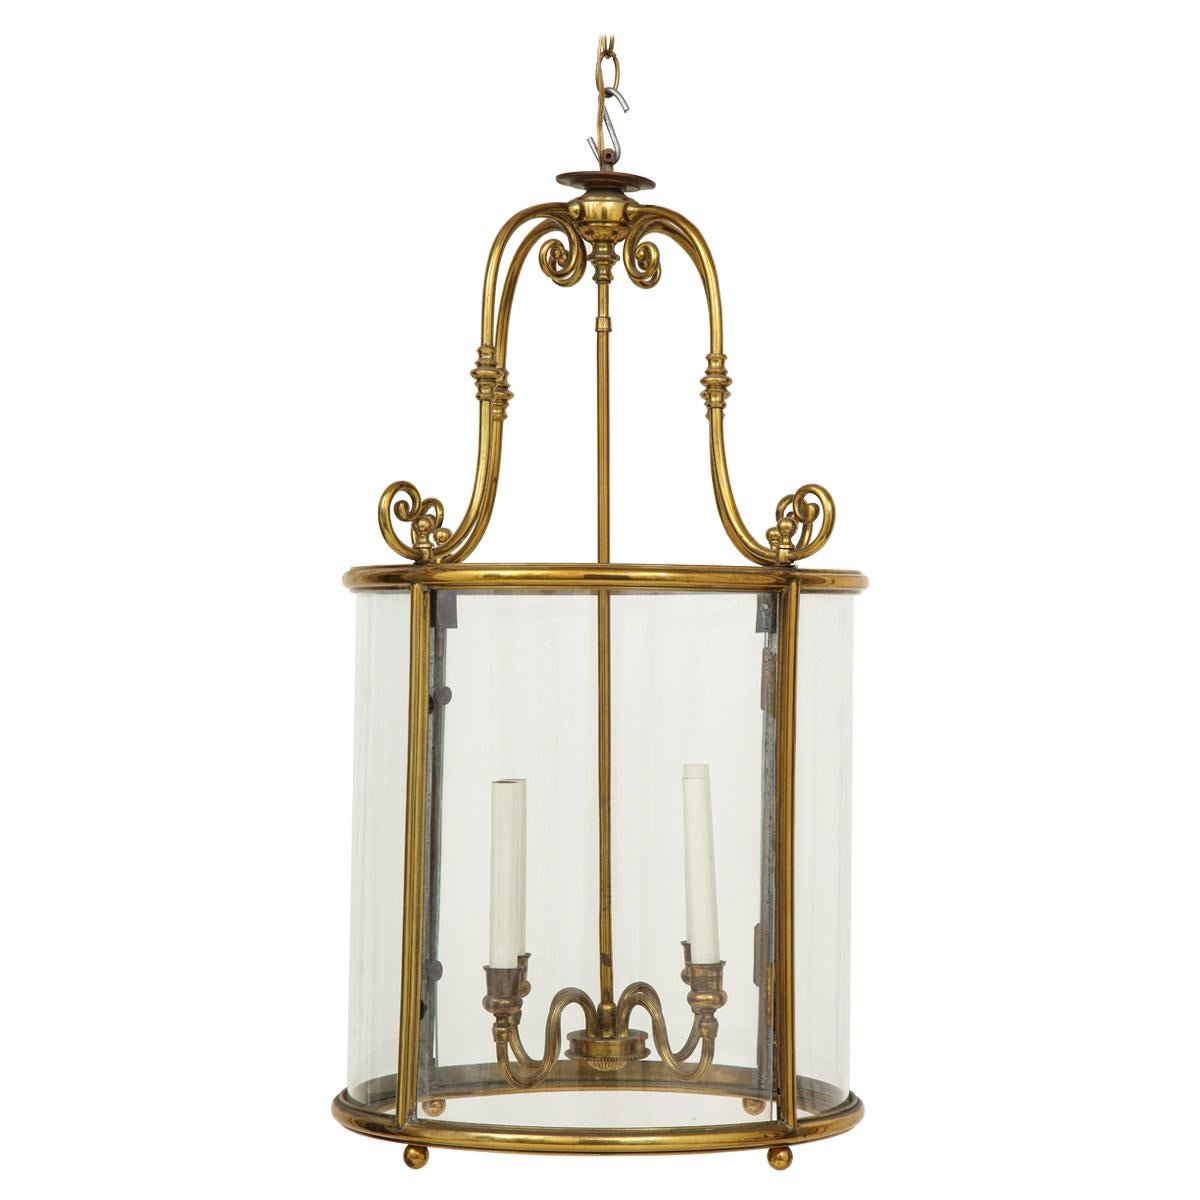 French Neoclassical Gilt Lacquered Brass and Glass Oval Four-Light Lantern